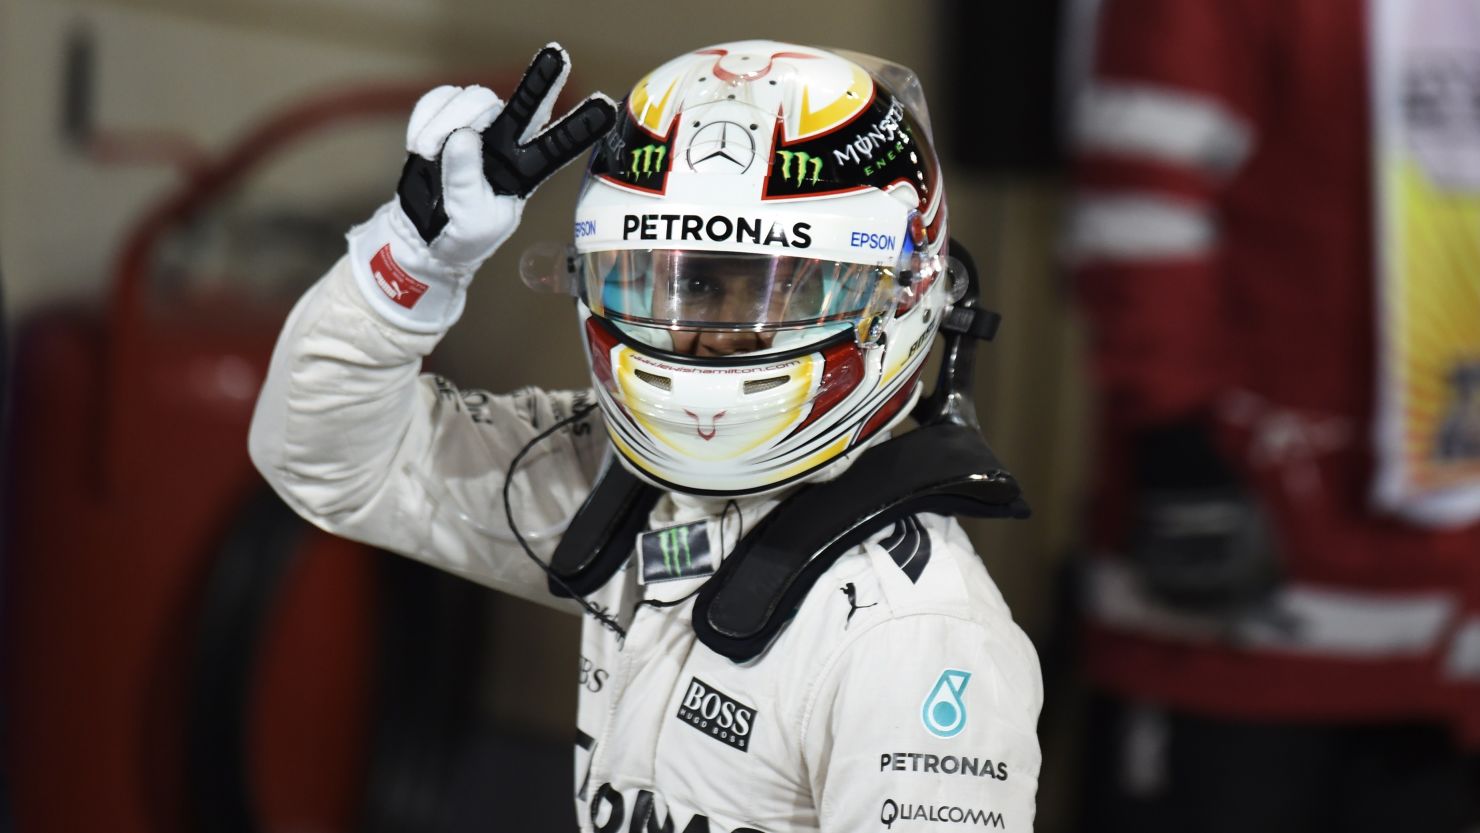 Lewis Hamilton celebrates after claiming poll at the Bahrain Grand Prix.